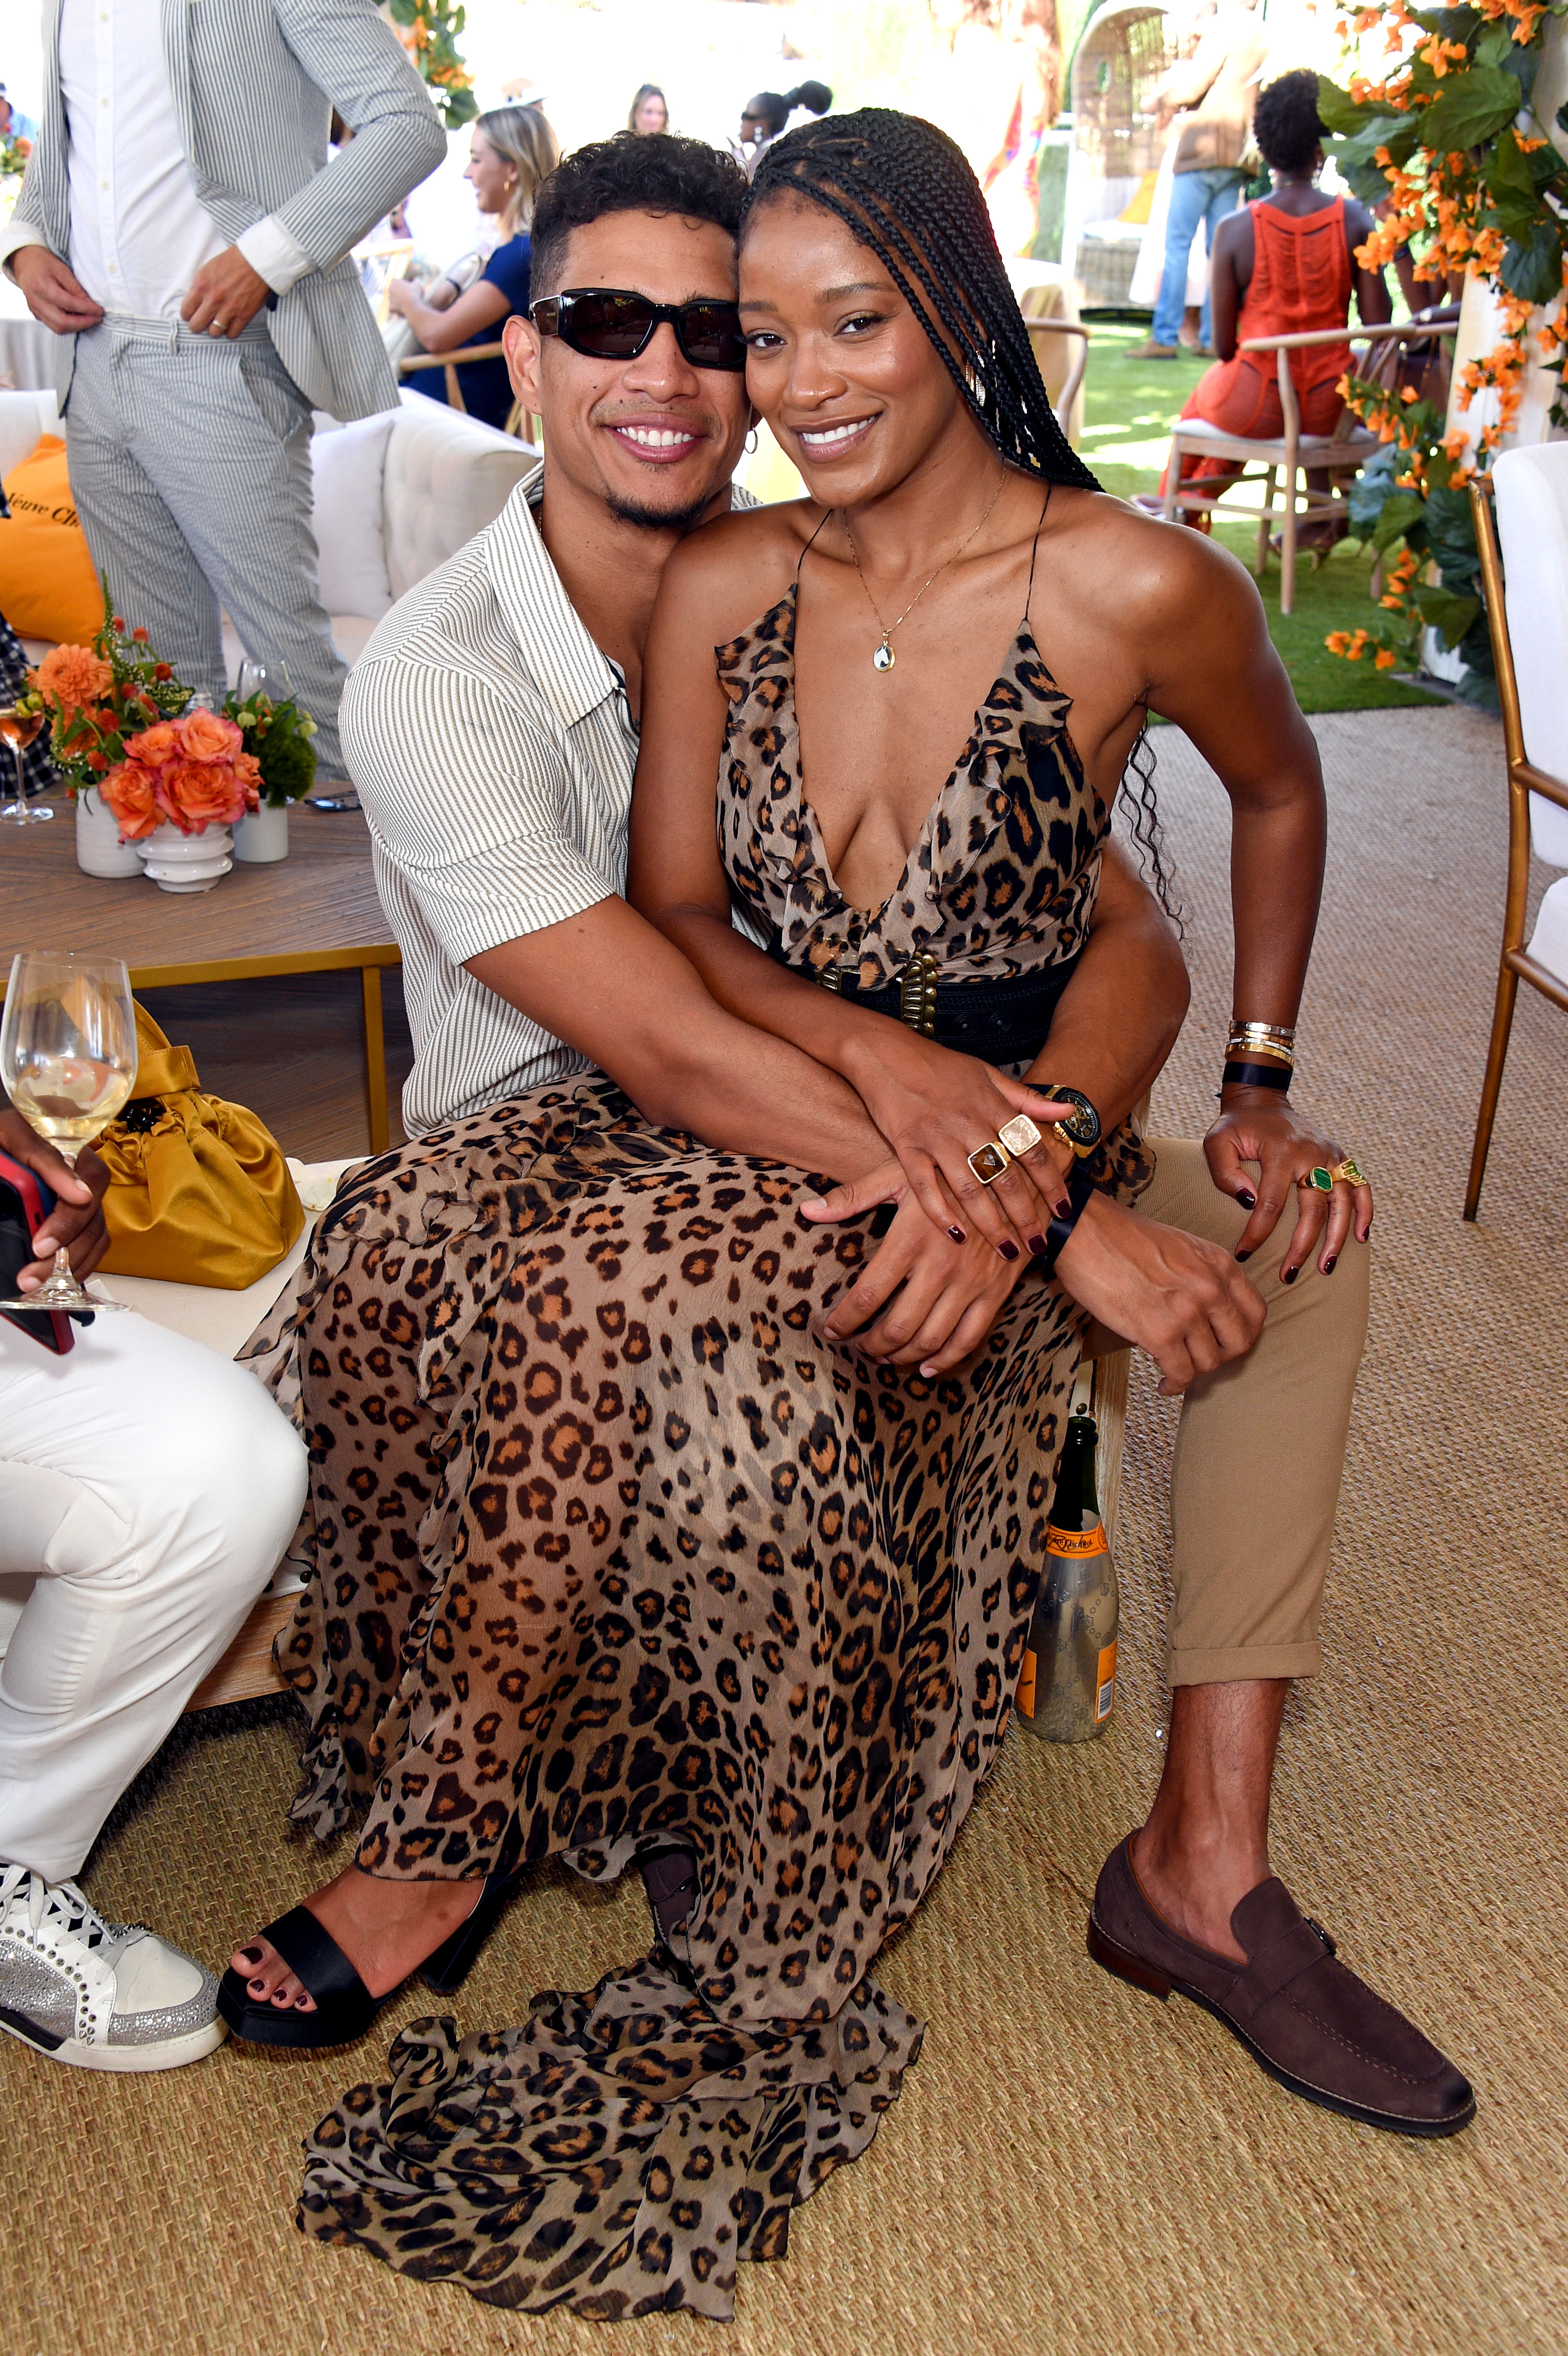 Darius Daulton Jackson and Keke Palmer attend the Veuve Clicquot Polo Classic Los Angeles at Will Rogers State Historic Park, on October 2, 2021, in Pacific Palisades, California. | Source: Getty Images